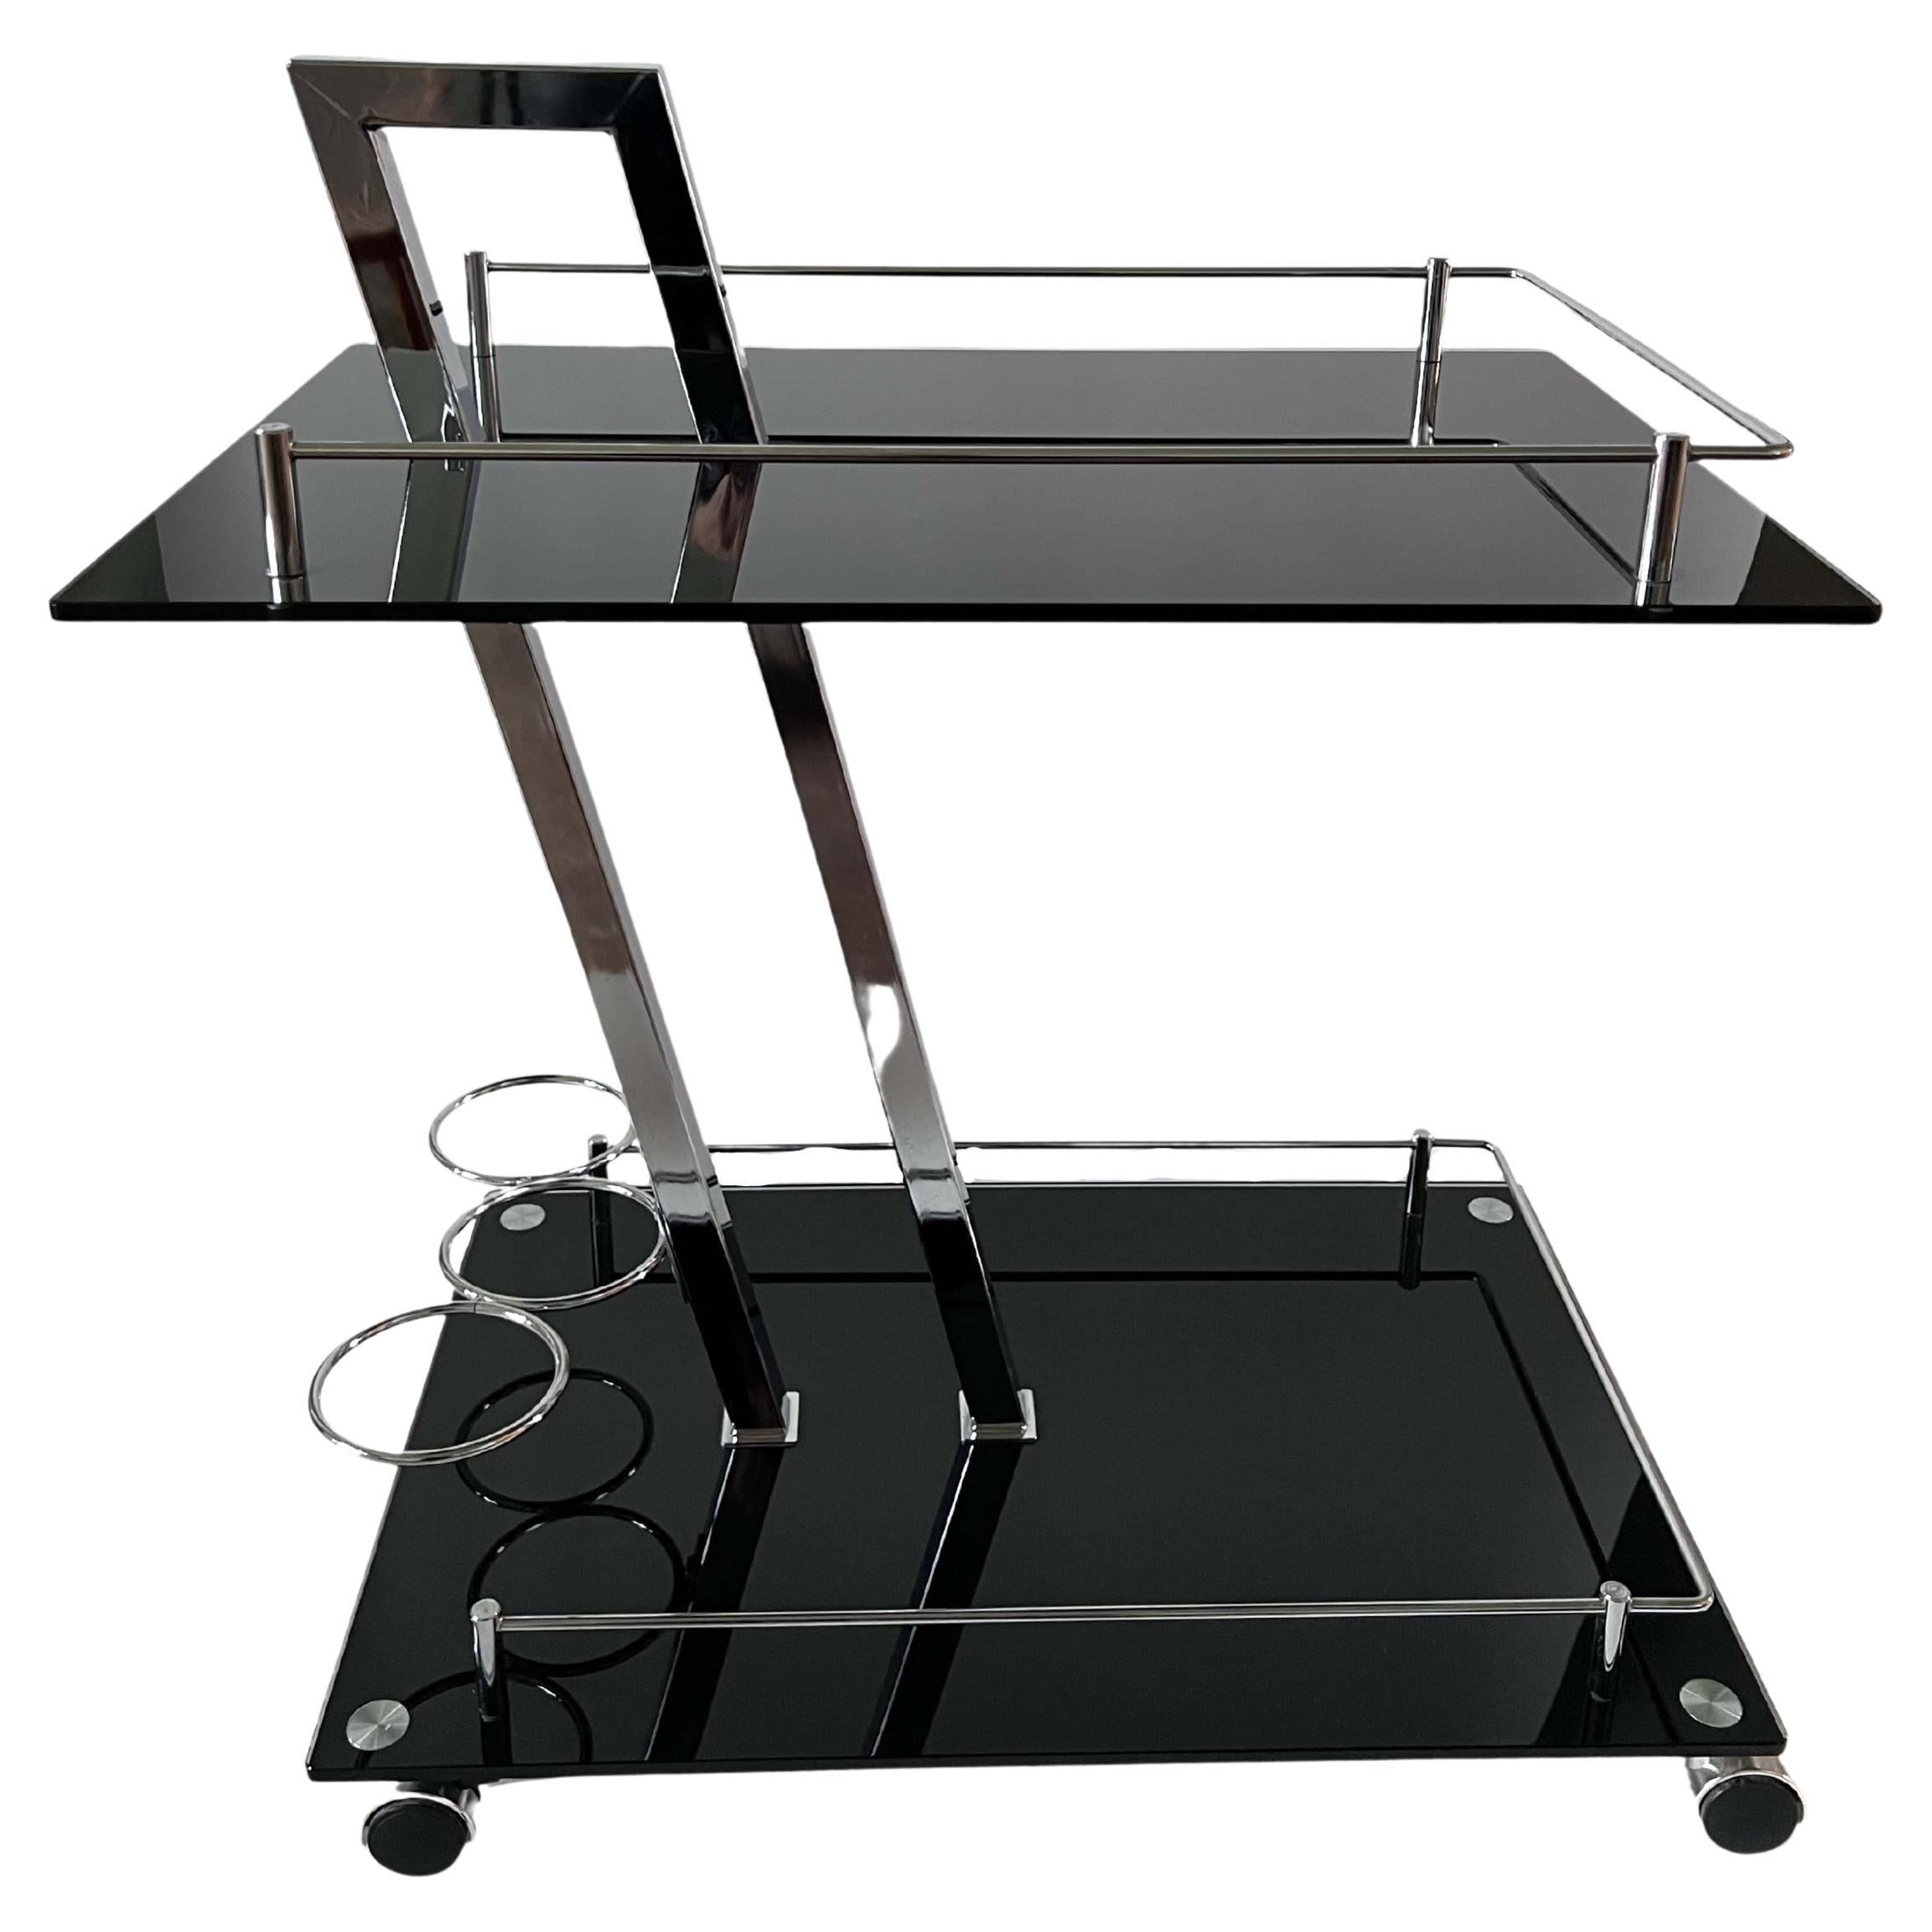 Italian Midcentury Serving Cart or Bar Cart, Black Glass and Chrome, 1960s For Sale